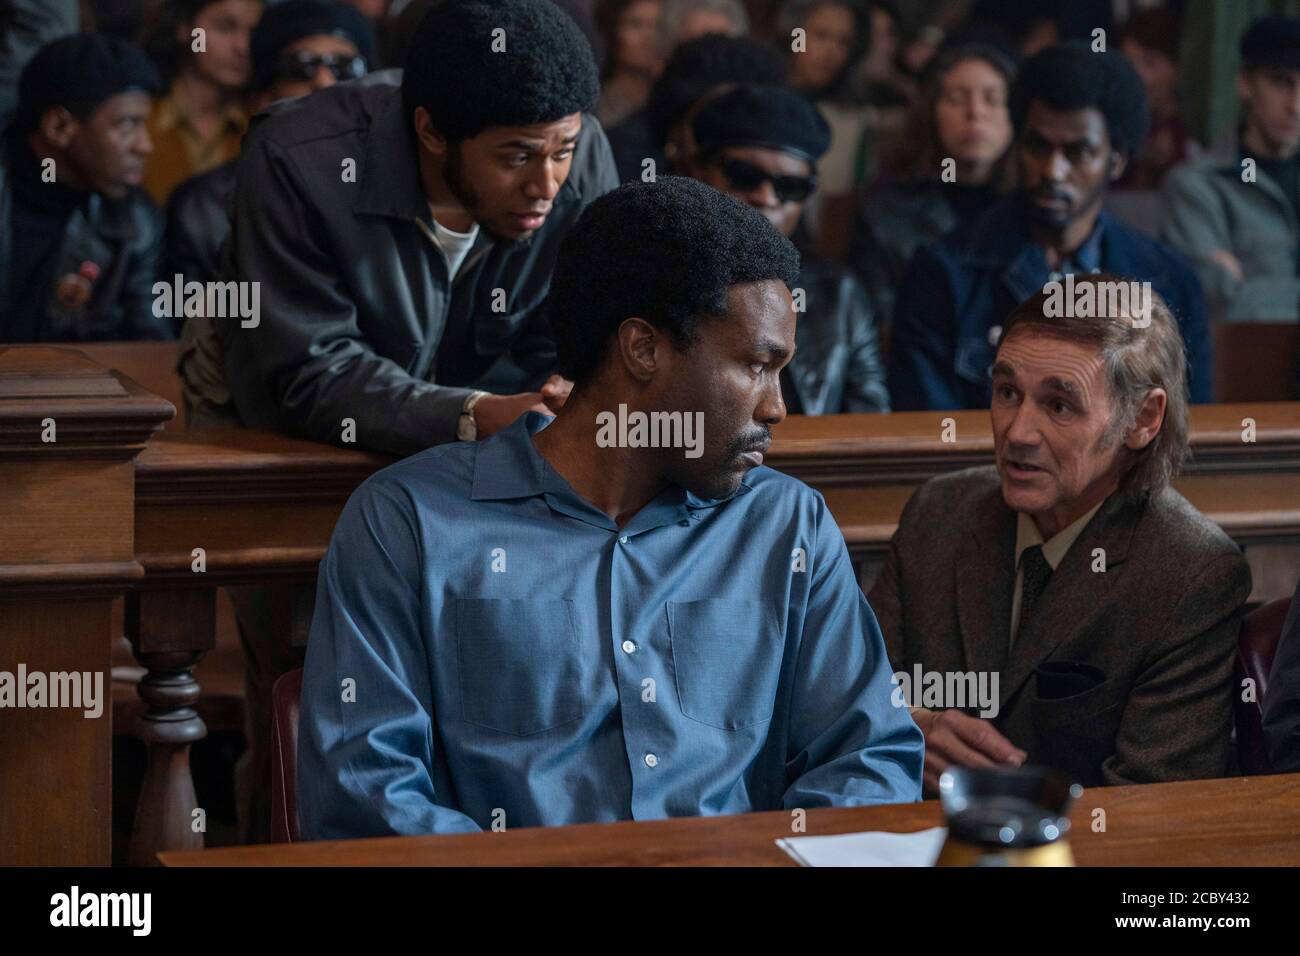 RELEASE DATE: October 16, 2020 TITLE: The Trial of the Chicago 7 STUDIO: Netflix DIRECTORS: Aaron Sorkin PLOT: The story of 7 people on trial stemming from various charges surrounding the uprising at the 1968 Democratic National Convention in Chicago. STARRING: (L -R) KELVIN HARRISON JR. as Fred Hampton, YAHYA ABDUL-MATEEN II as Bobby Seale, MARK RYLANCE as William Kuntsler. (Credit Image: © Niko Tavernise/Netflix/Entertainment Pictures via ZUMA Wire) Stock Photo